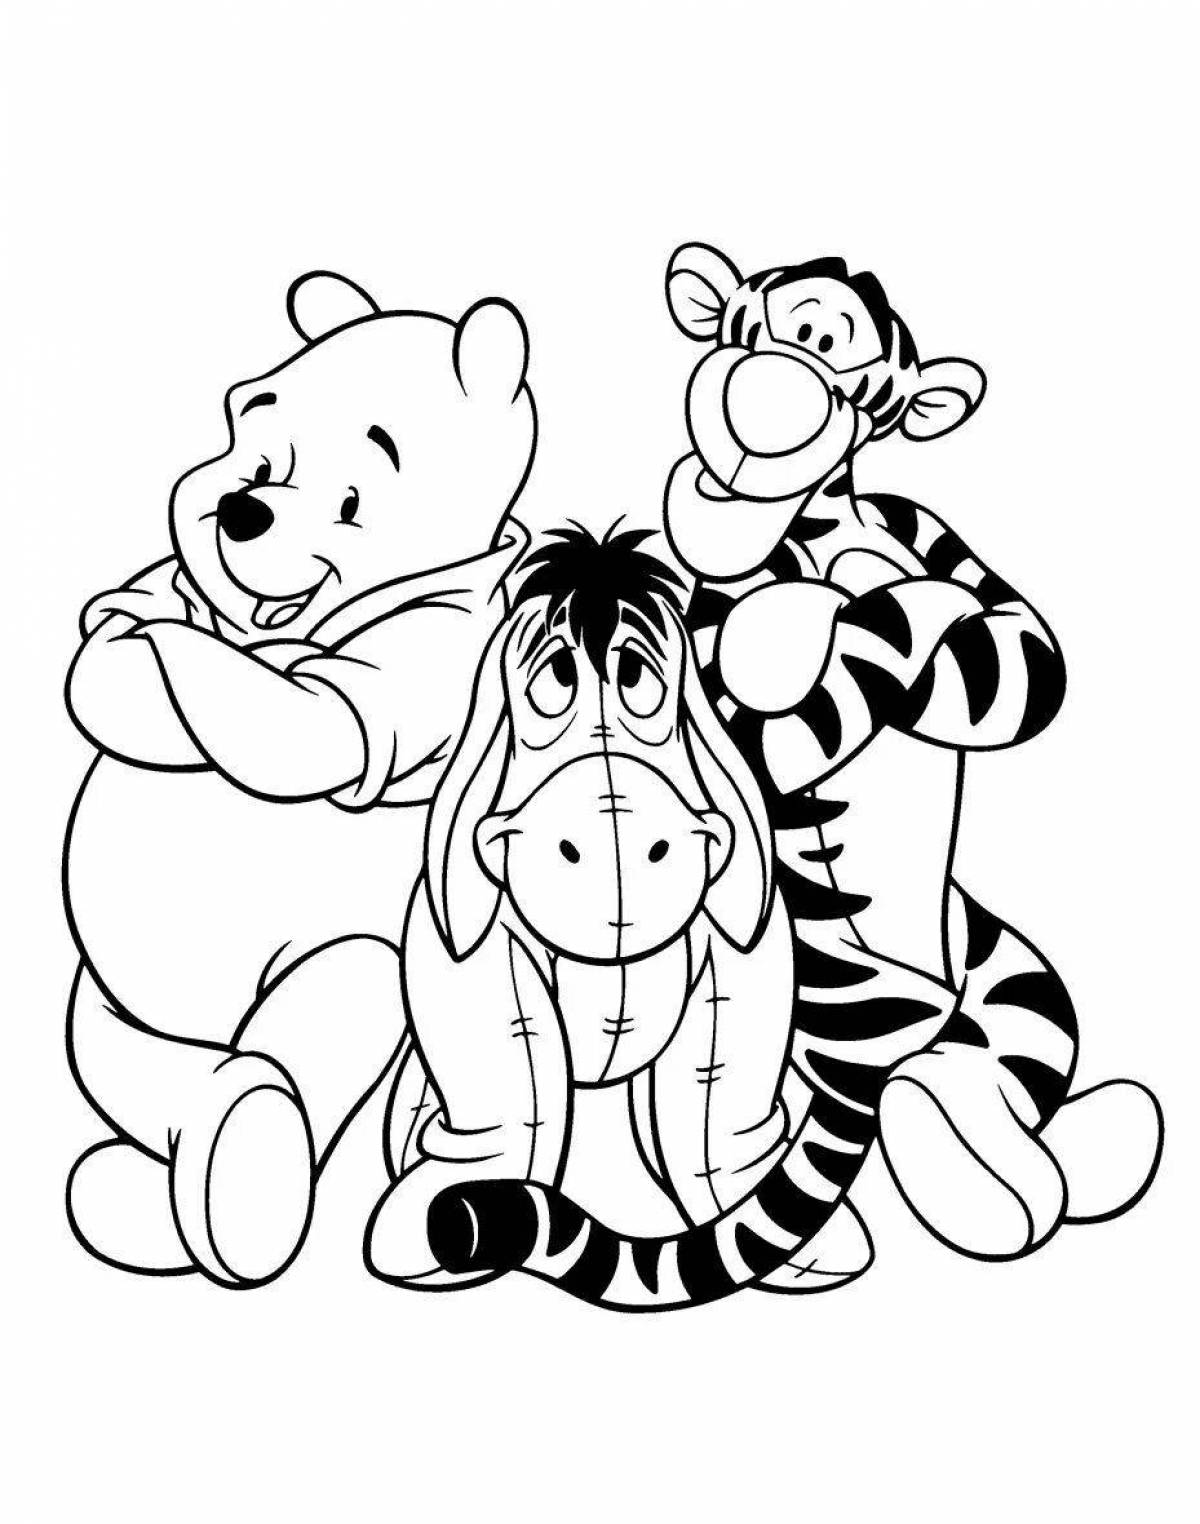 Awesome winnie the pooh coloring book